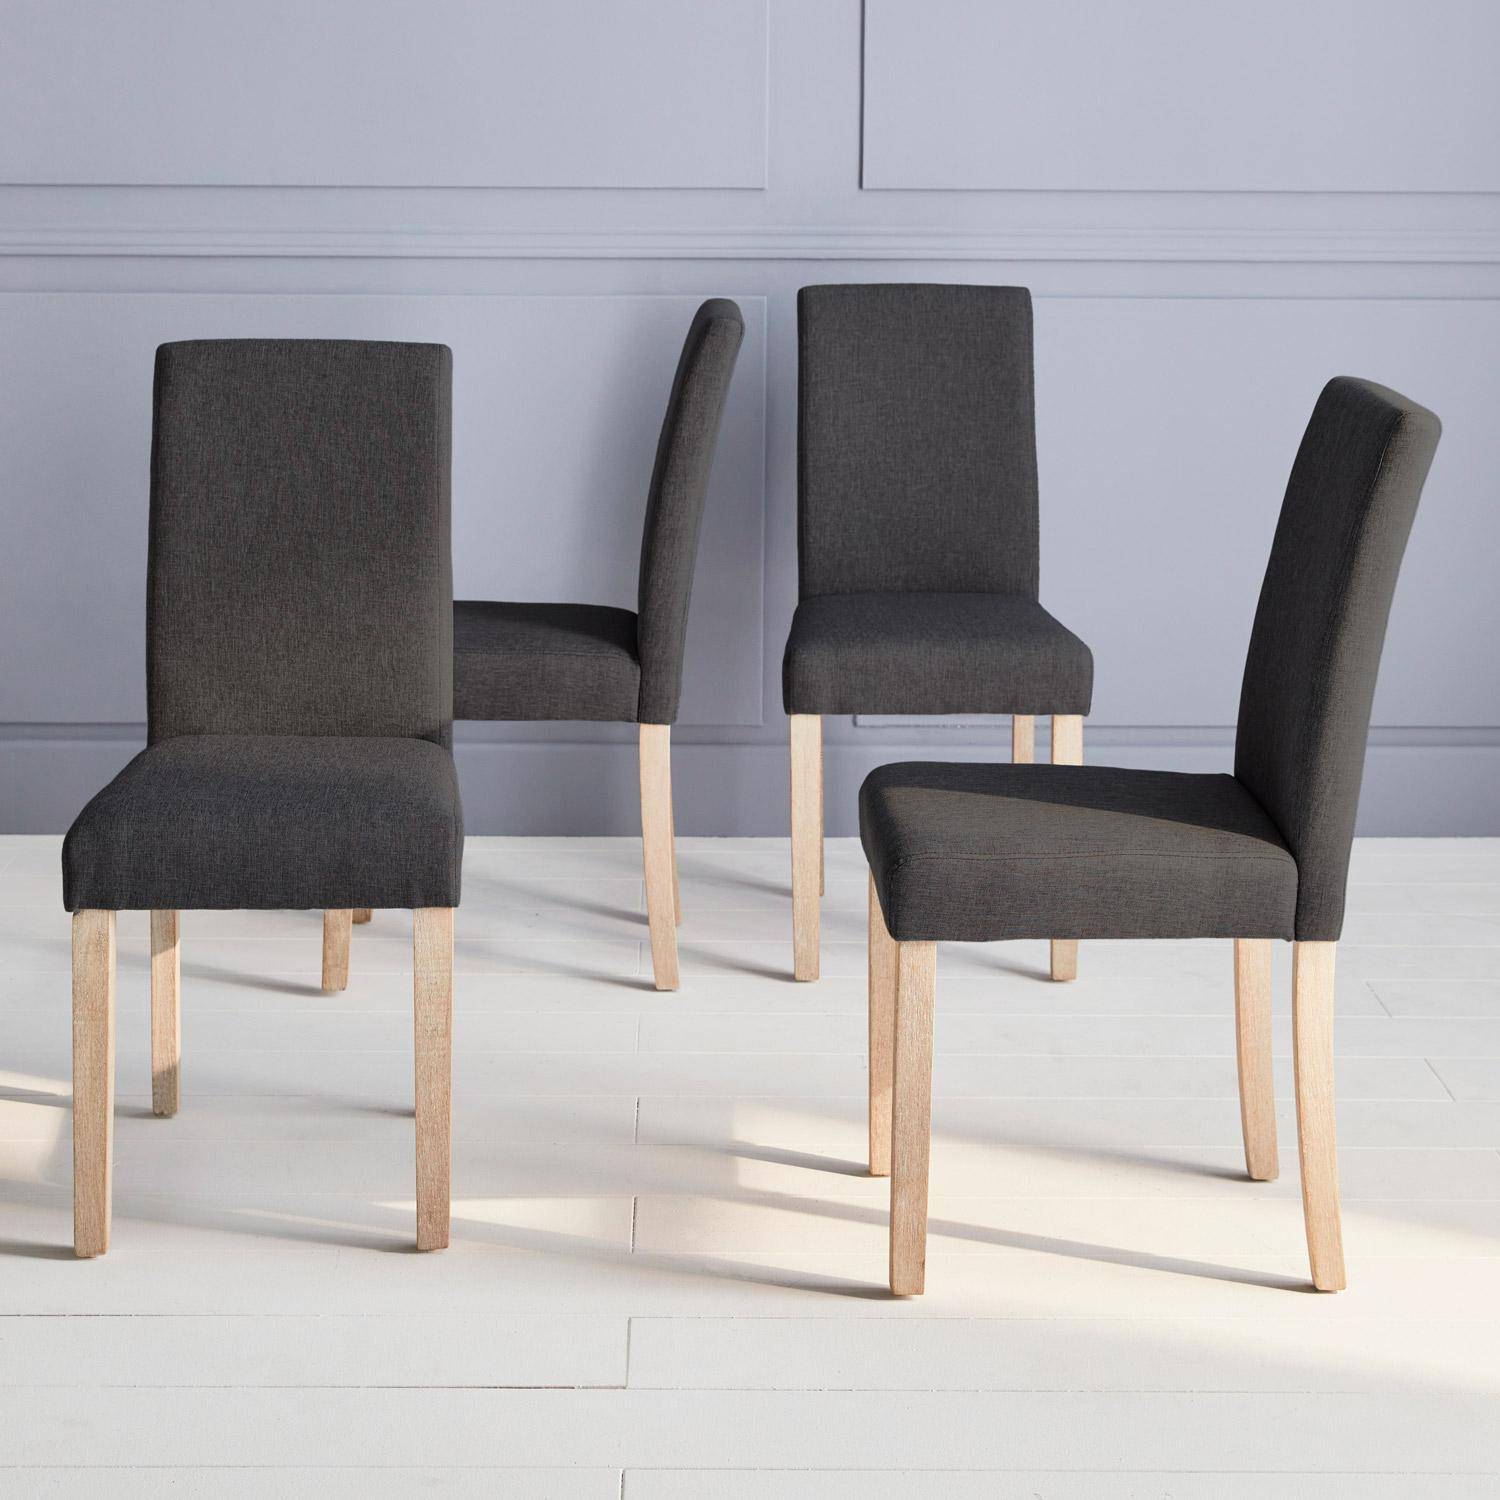 Set of 4 fabric dining chairs with wooden legs - Rita - Charcoal grey Photo2